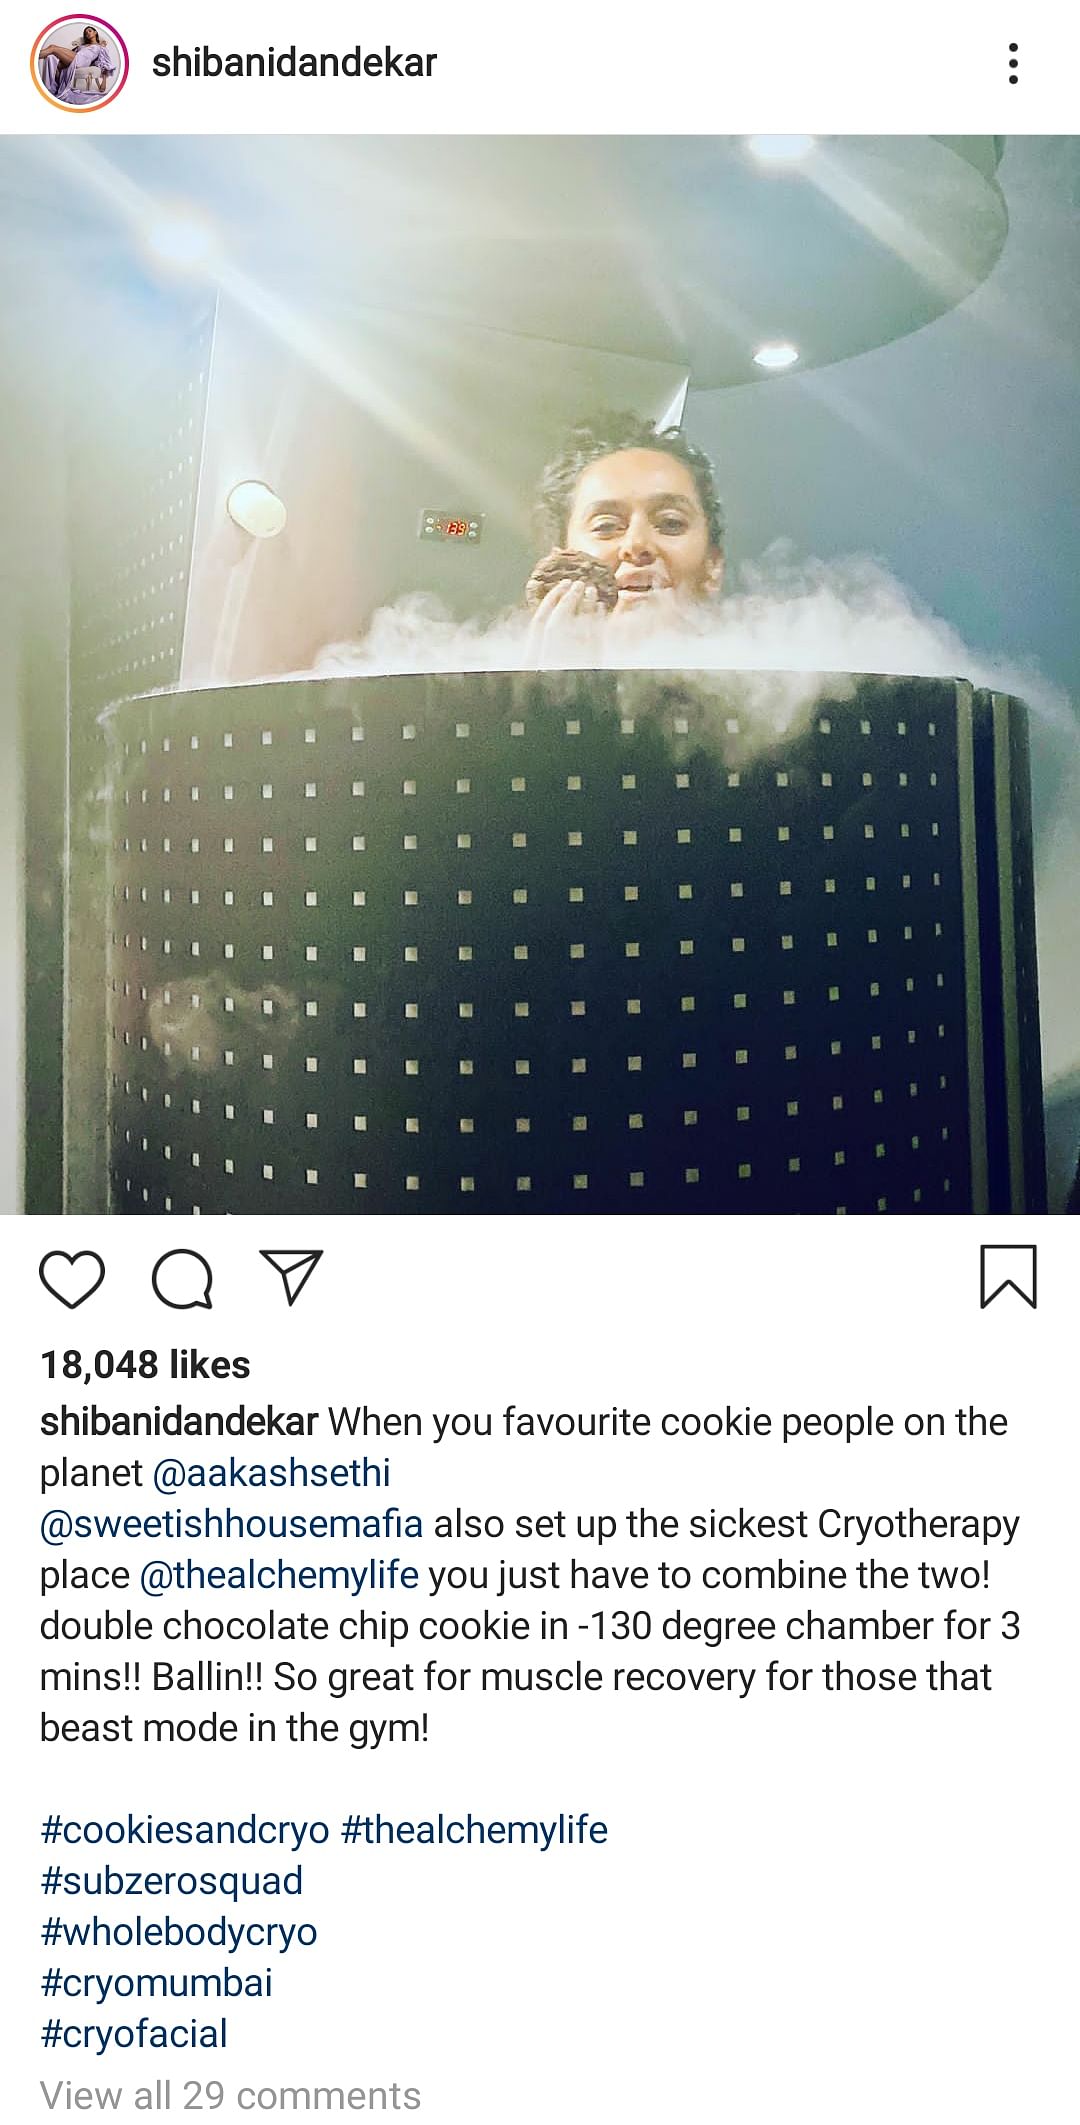 Cryotherapy: The New Craze That’s Got Farhan & Shibani Hooked